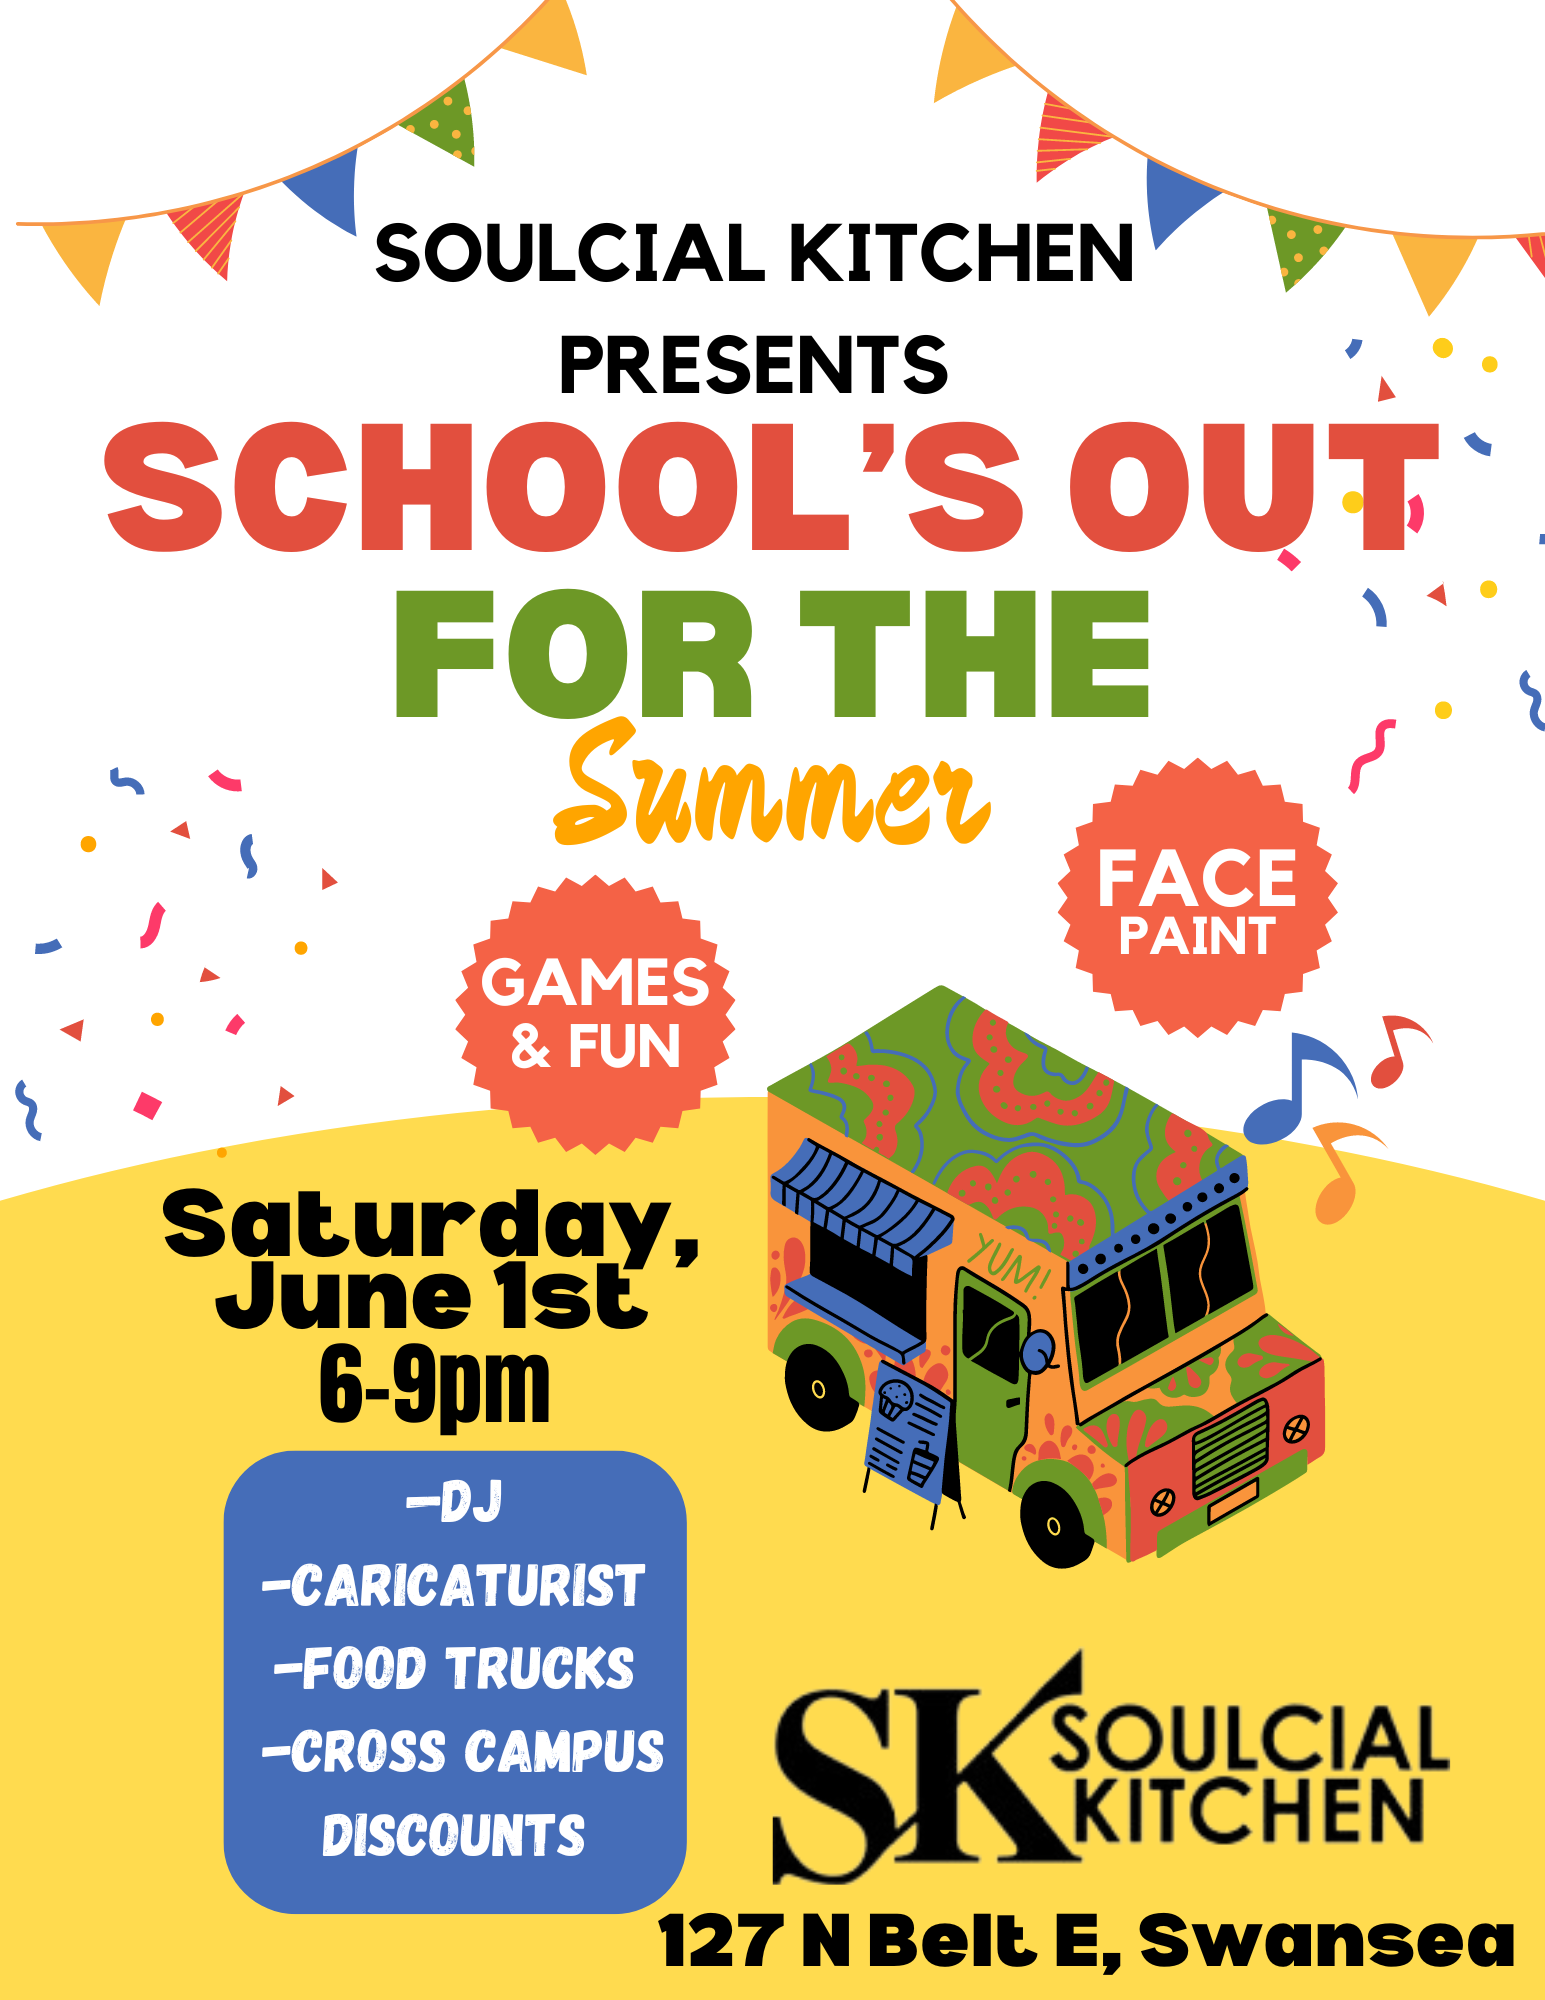 School is out for the Summer Party at Soulcial Kitchen